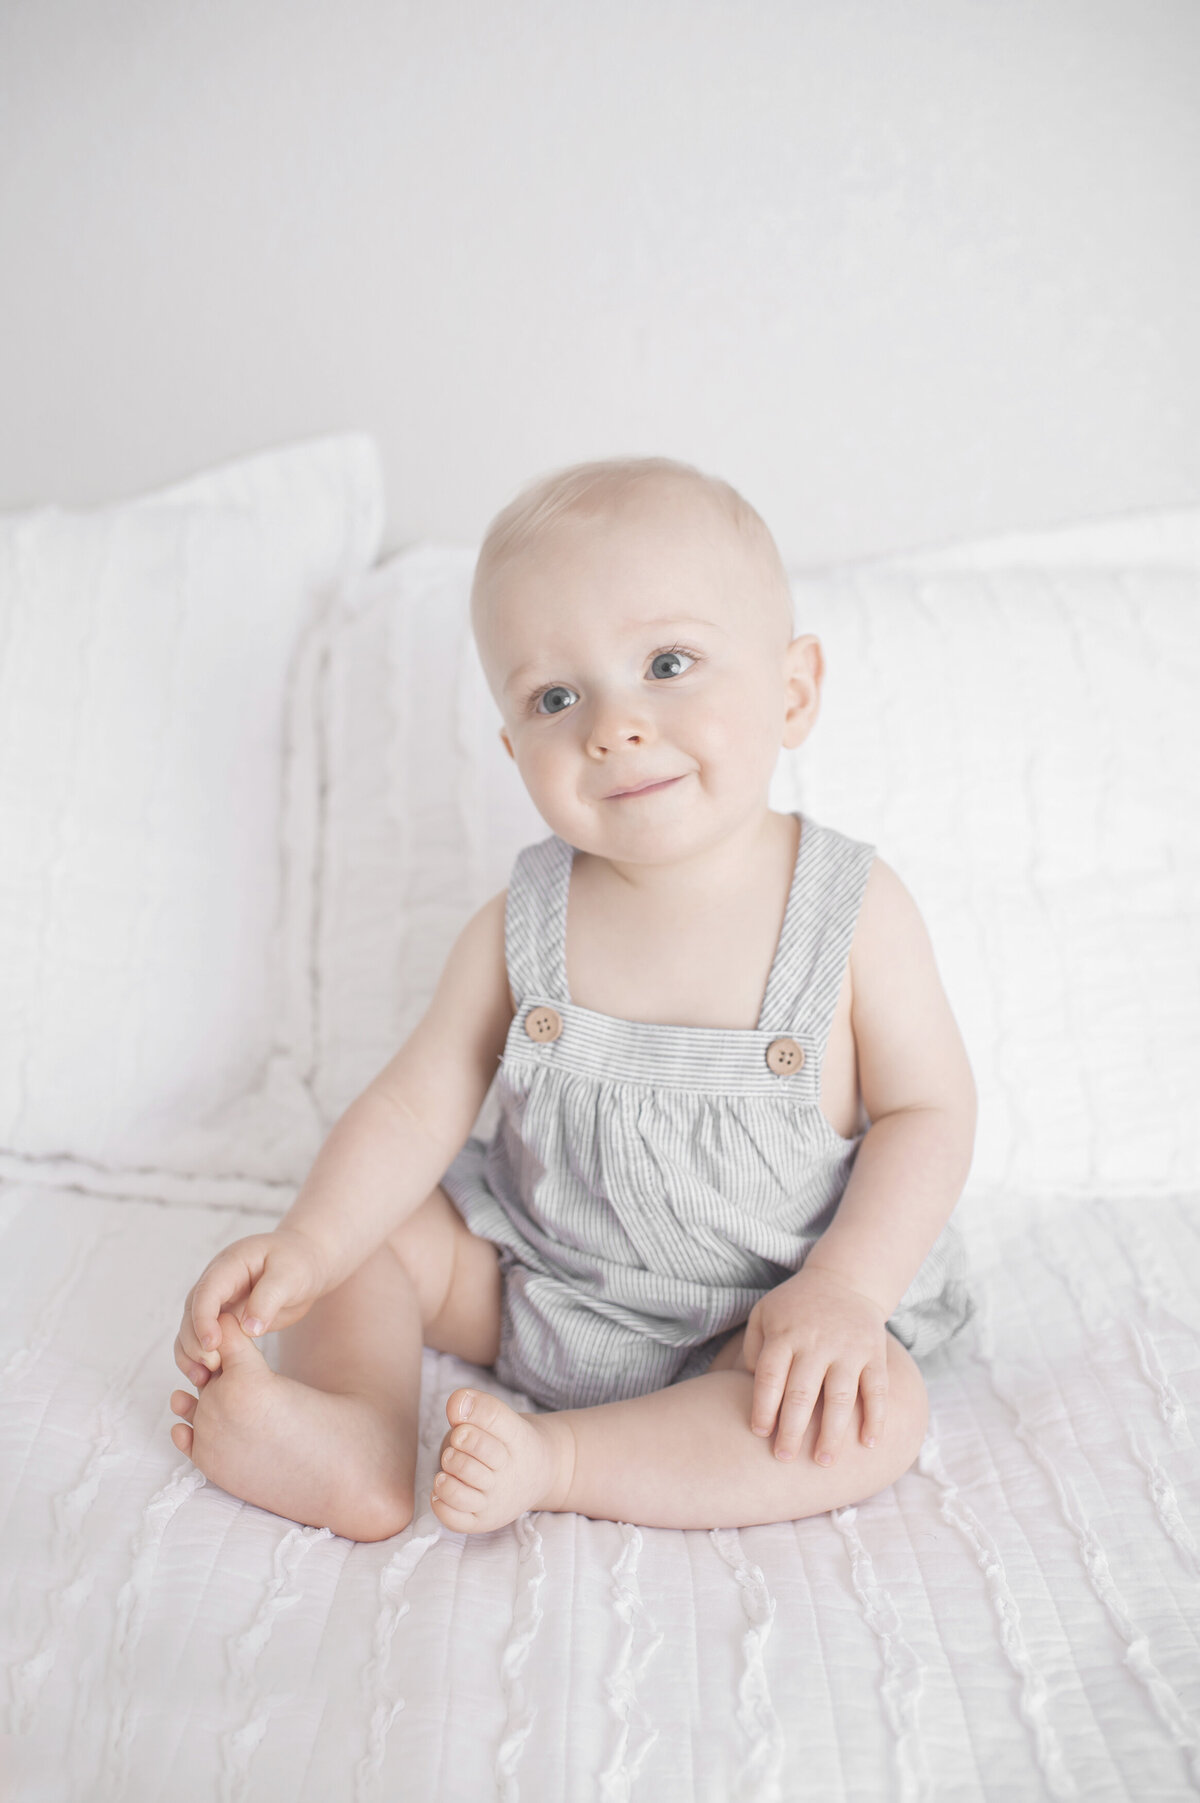 one year old baby sitting on white bed holding foot smiling